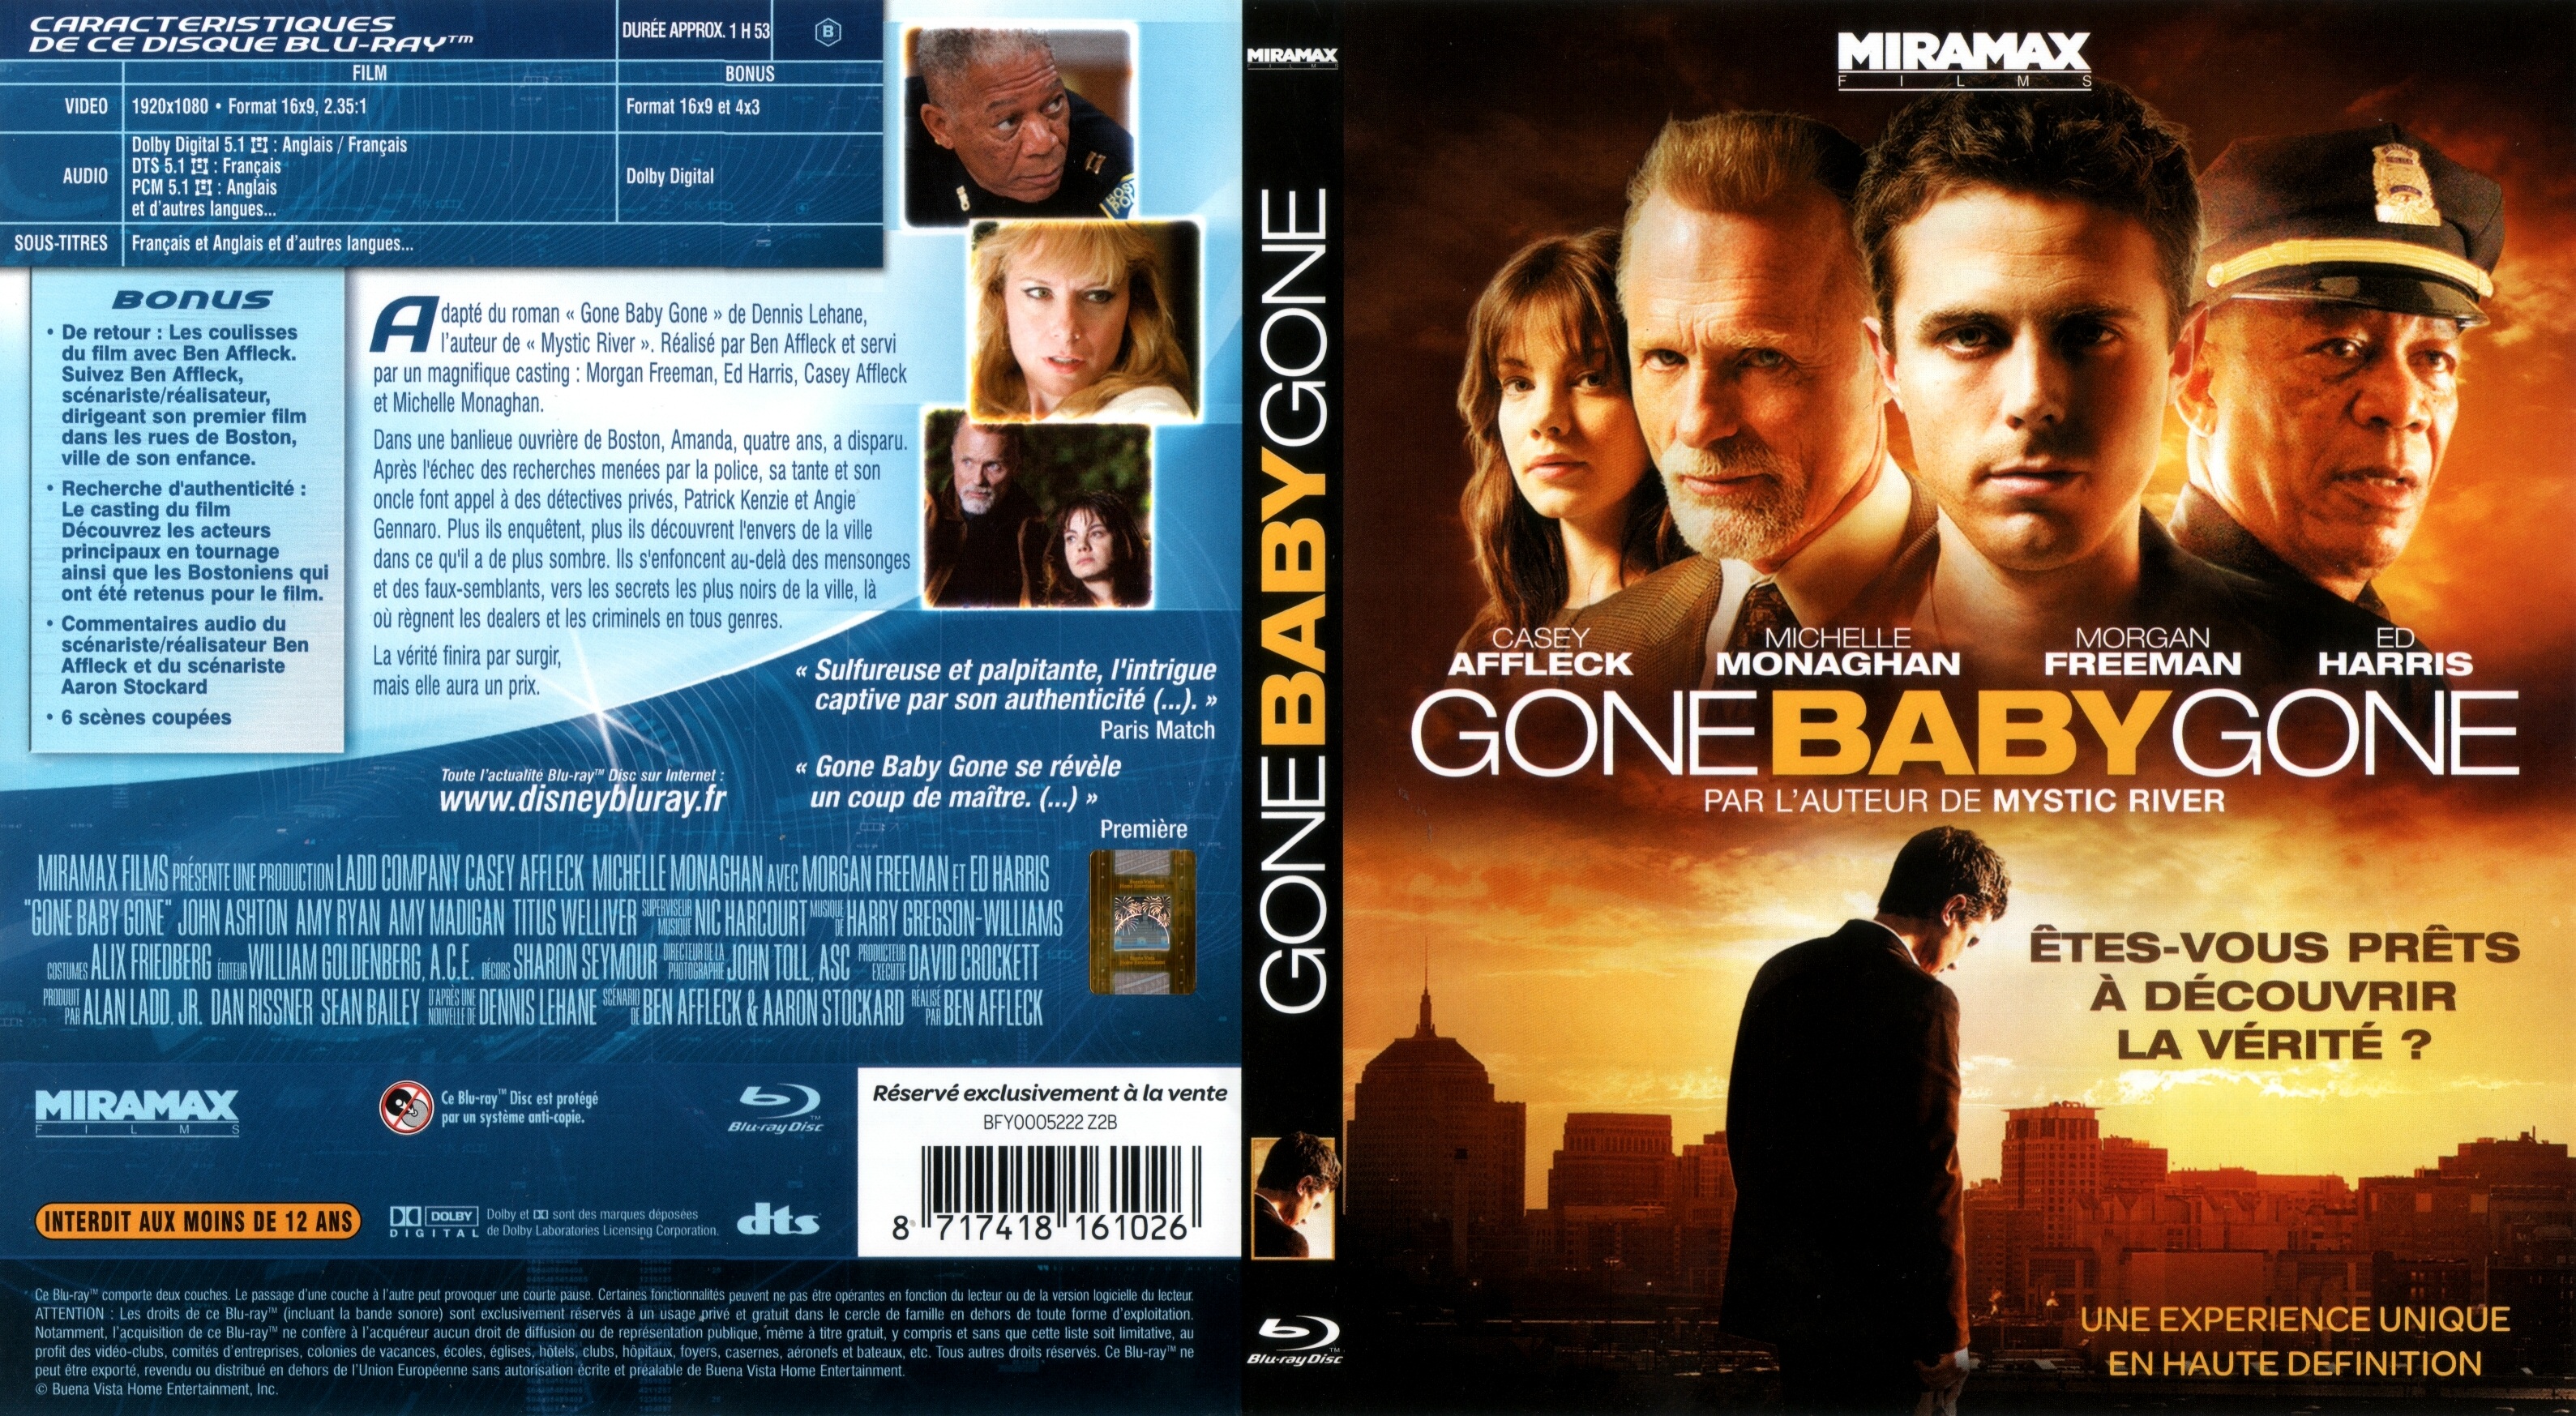 Jaquette DVD Gone baby gone (BLU-RAY)